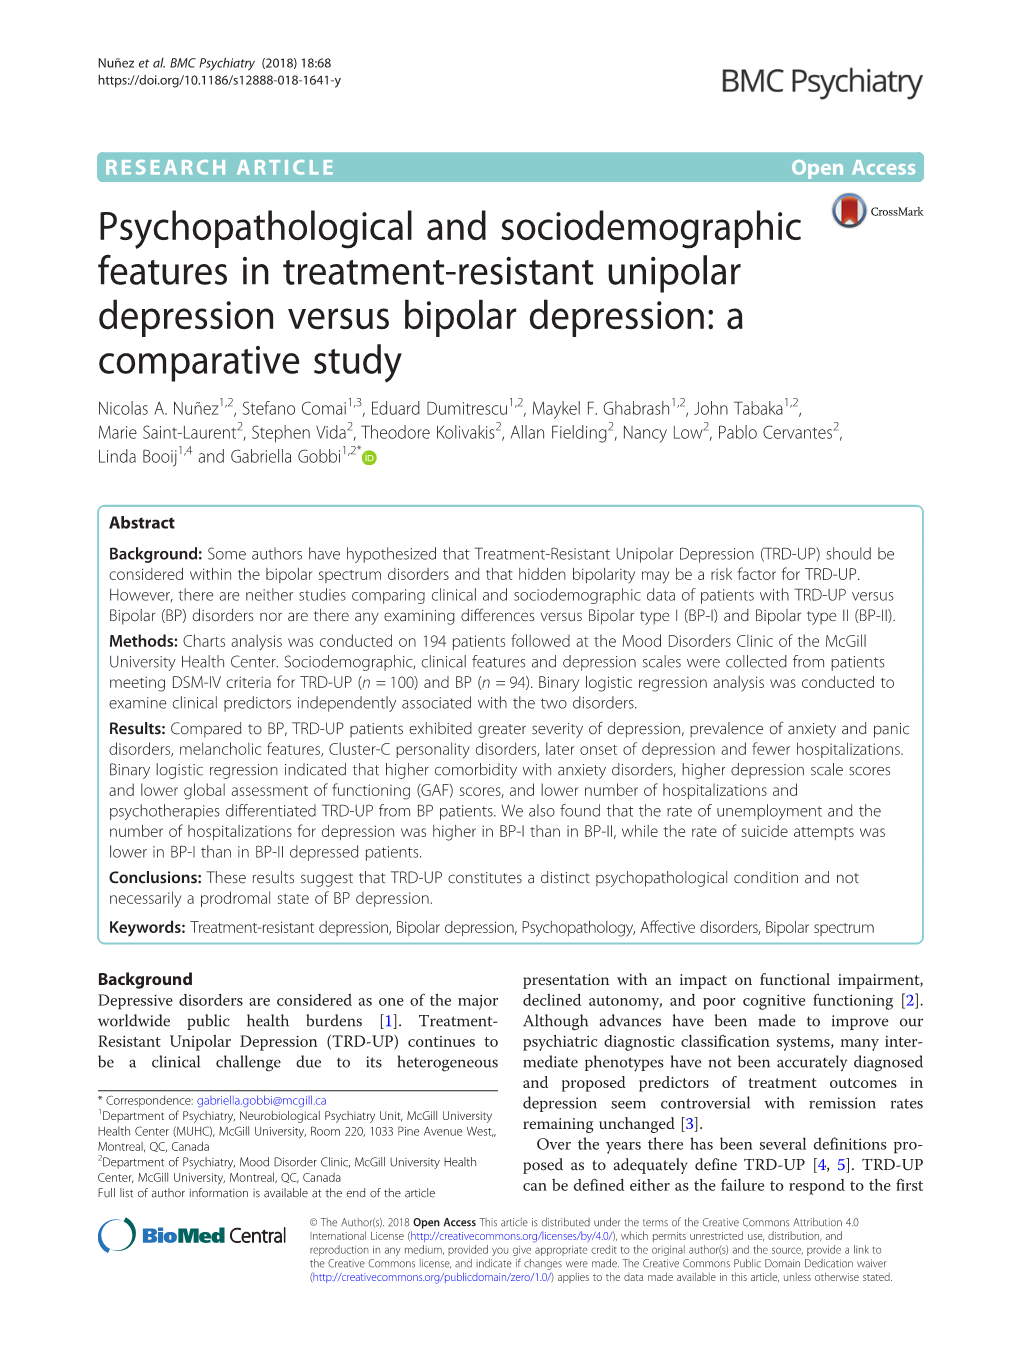 Psychopathological and Sociodemographic Features in Treatment-Resistant Unipolar Depression Versus Bipolar Depression: a Comparative Study Nicolas A